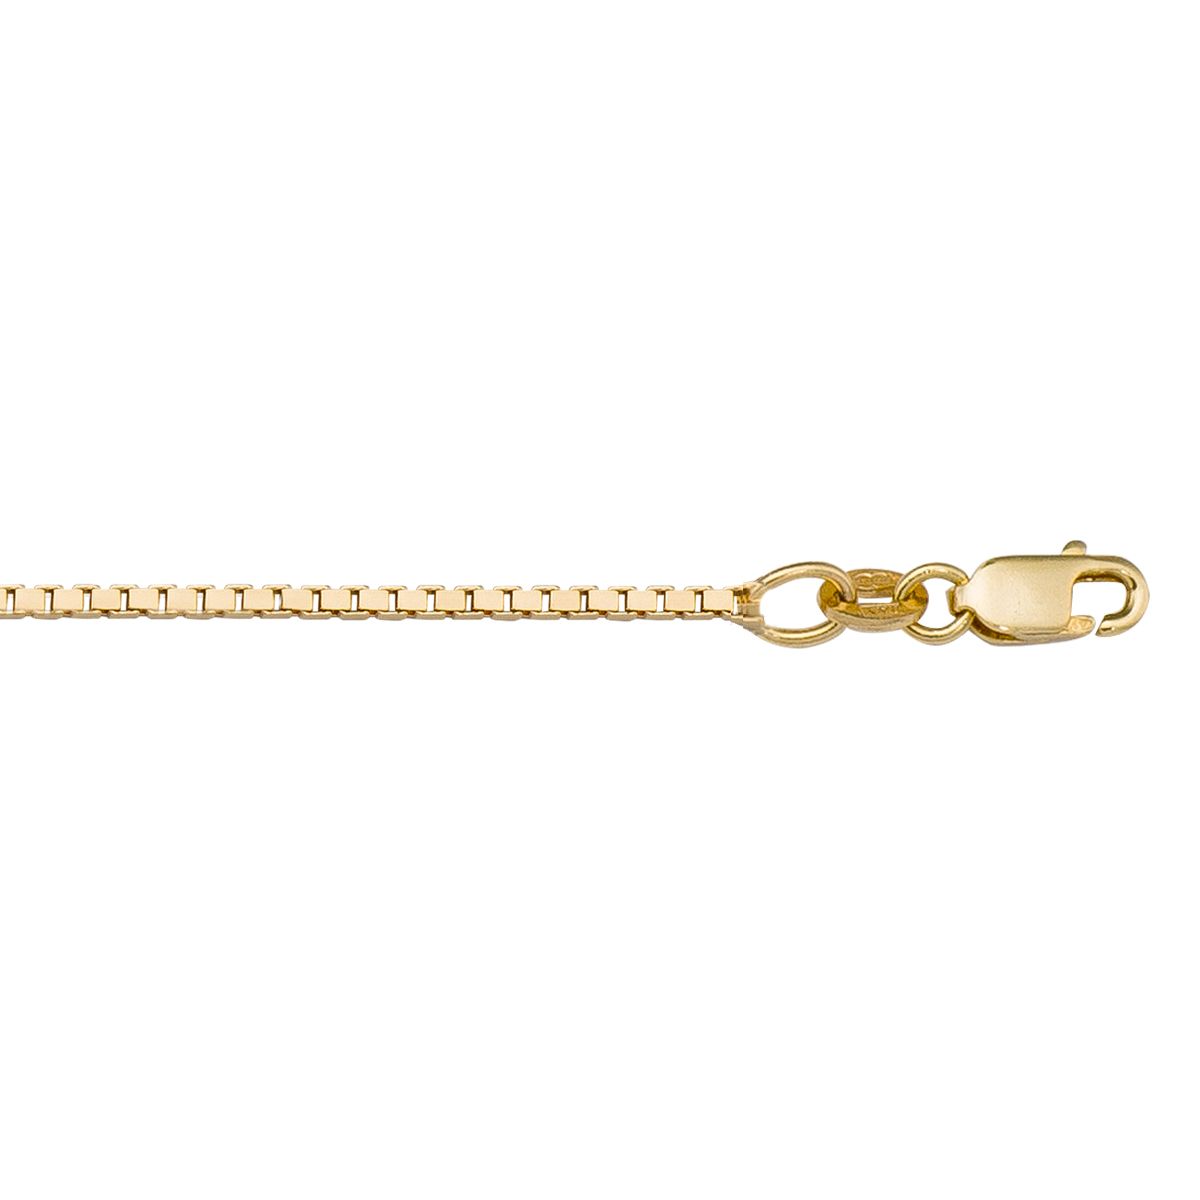 CBX01, Gold Chain, Box, Yellow Gold, 0.6 to 1.3 mm